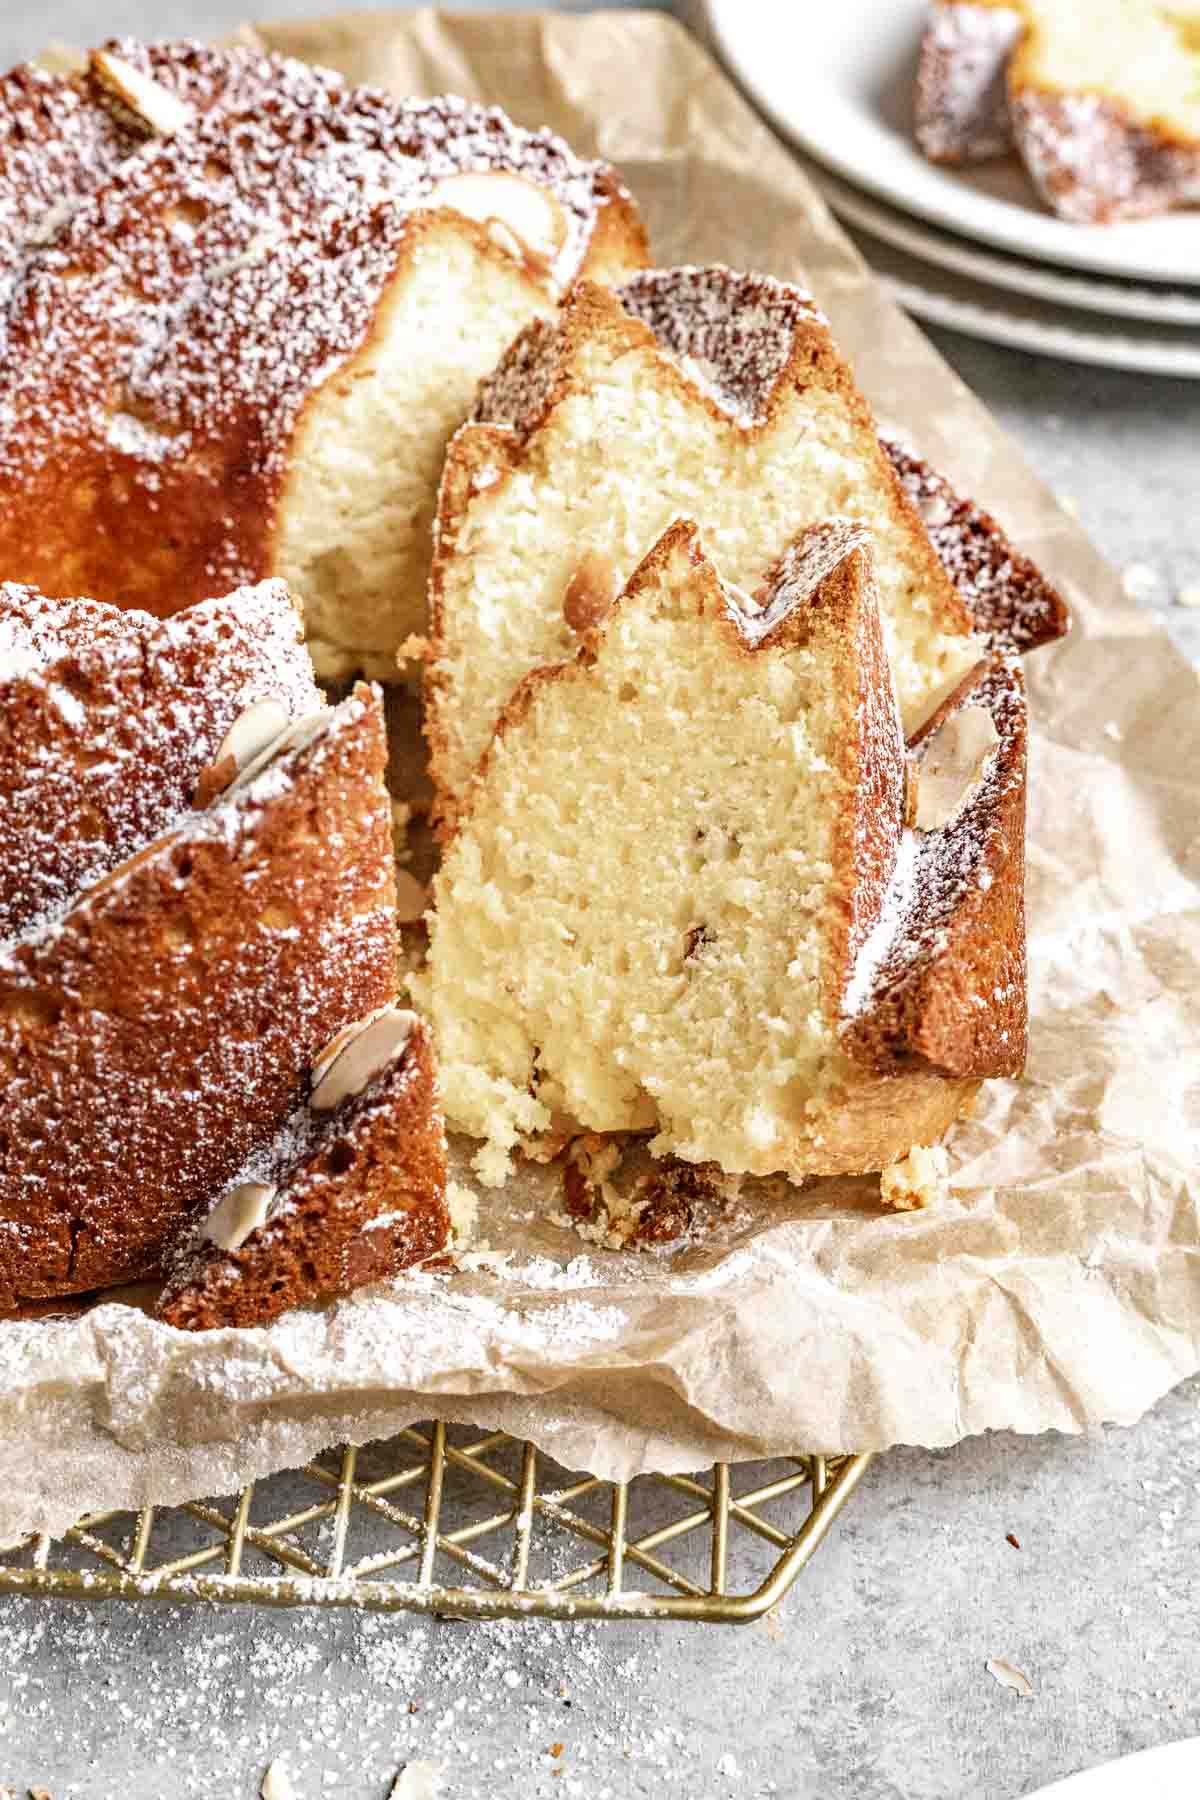 Almond Bundt Cake dusted with powdered sugar and sliced on parchment